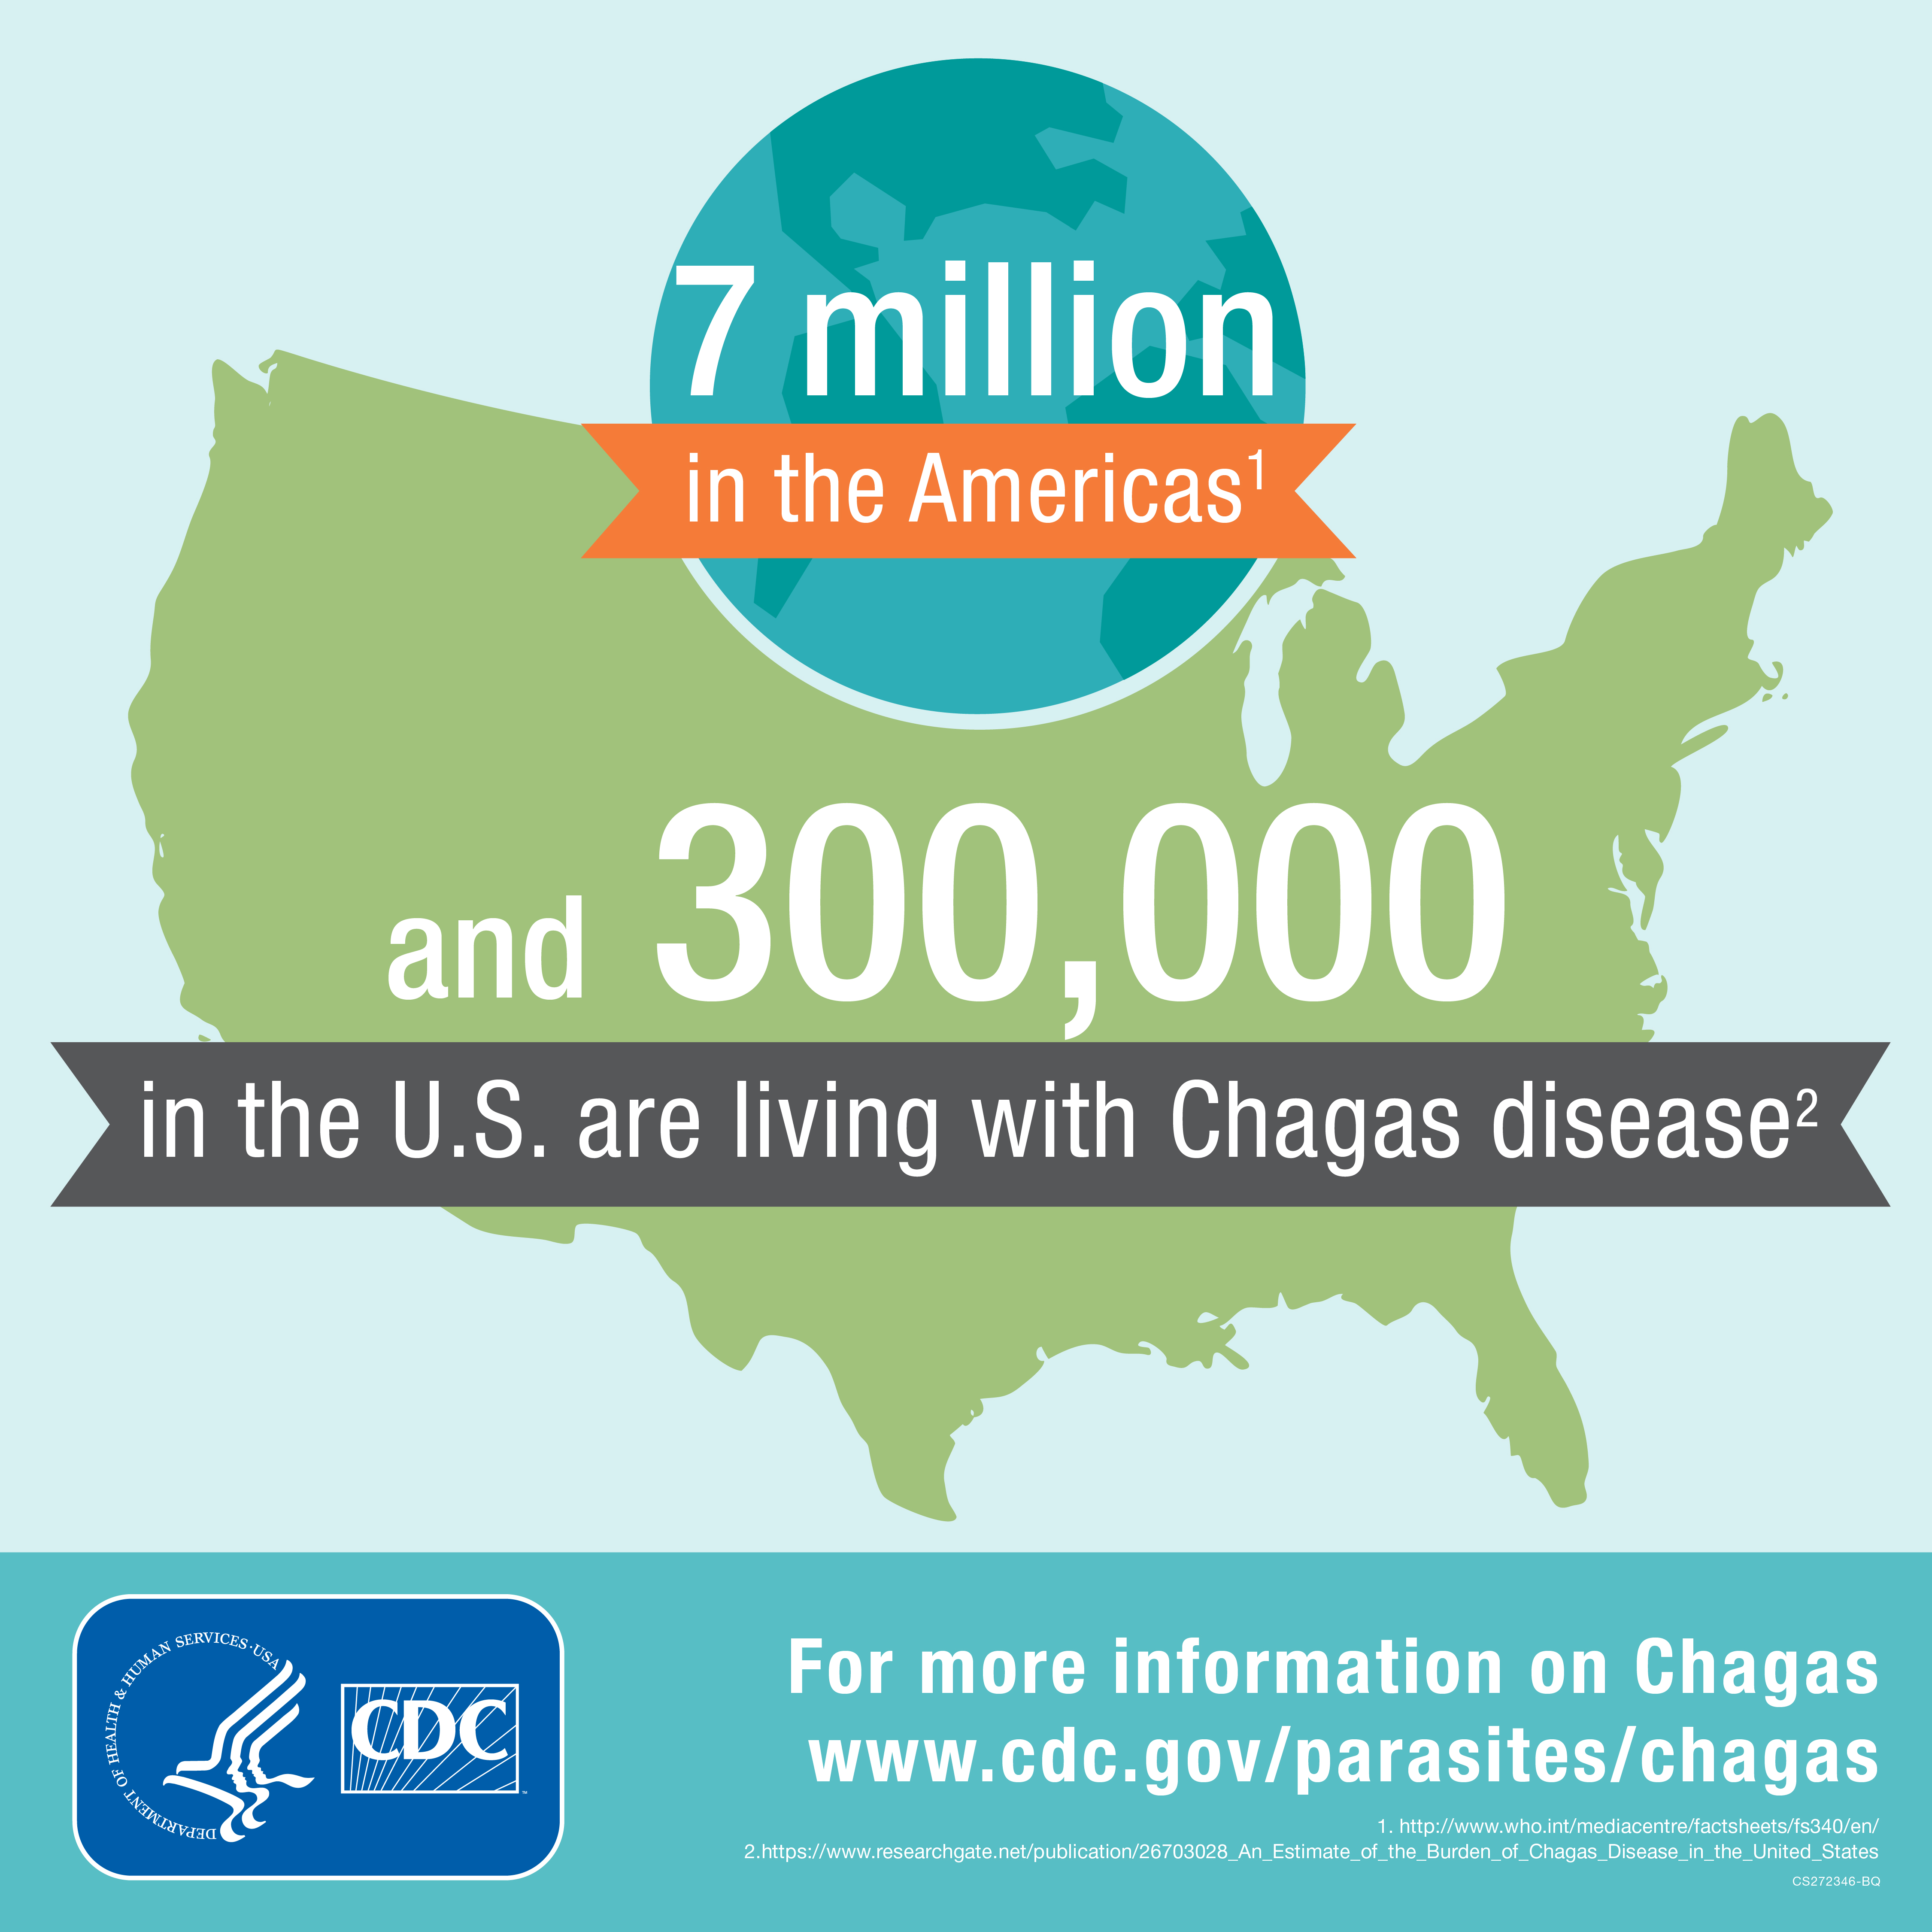 7 million in the Americas and 300,000 in the U.S. are living with Chagas disease